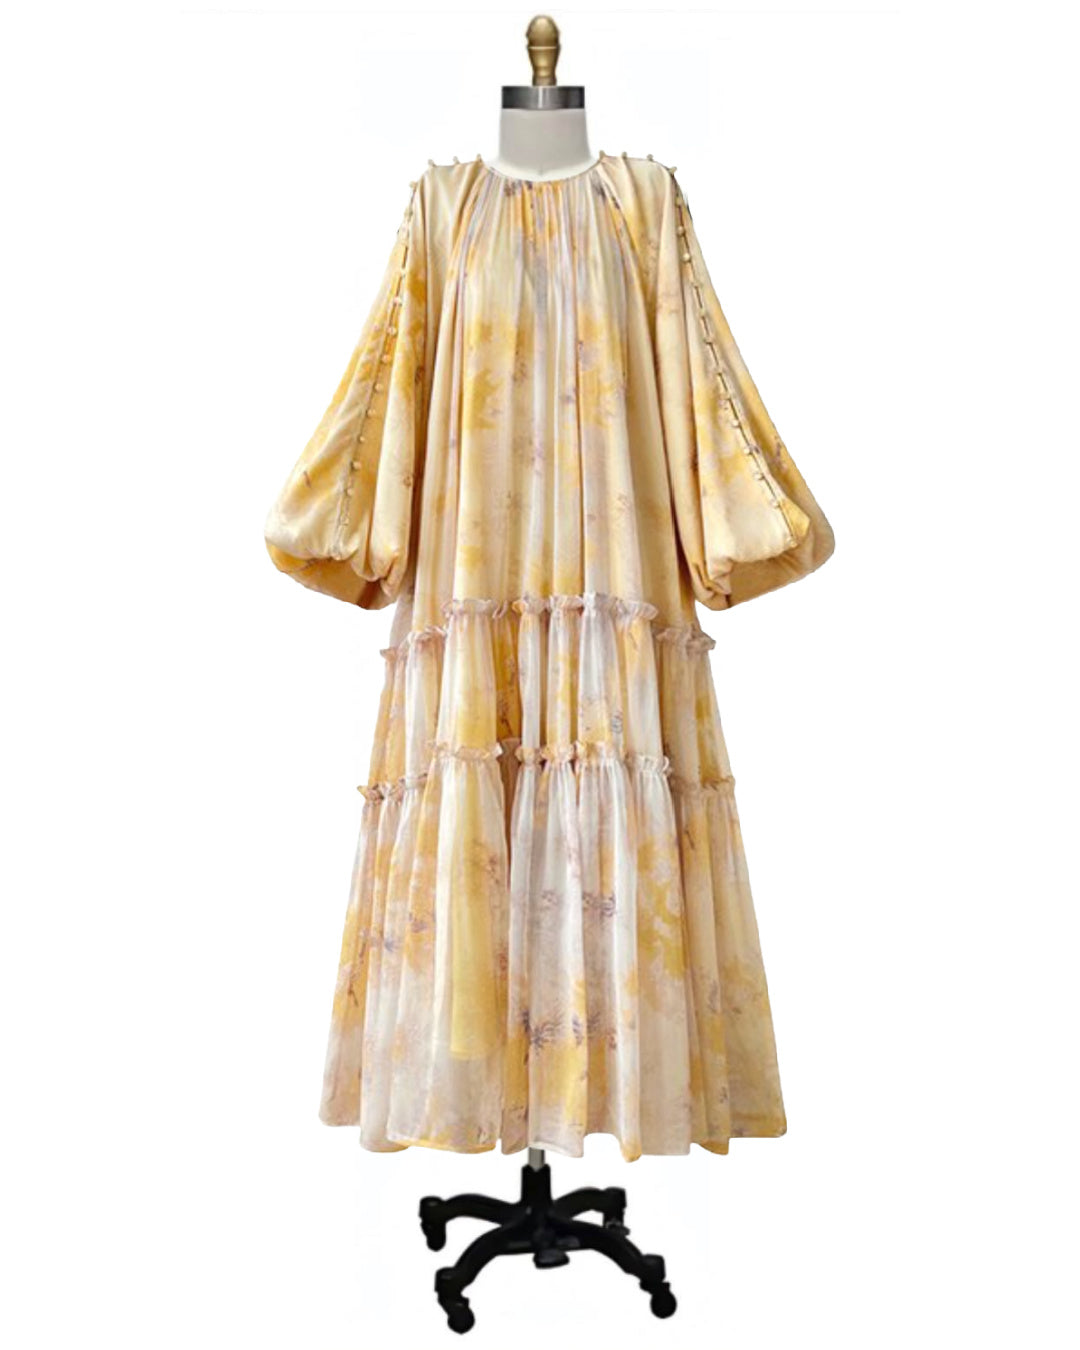 Mariano- the Fortuny Style Button Balloon Sleeved Floral Tiered Dress with Cord Sash